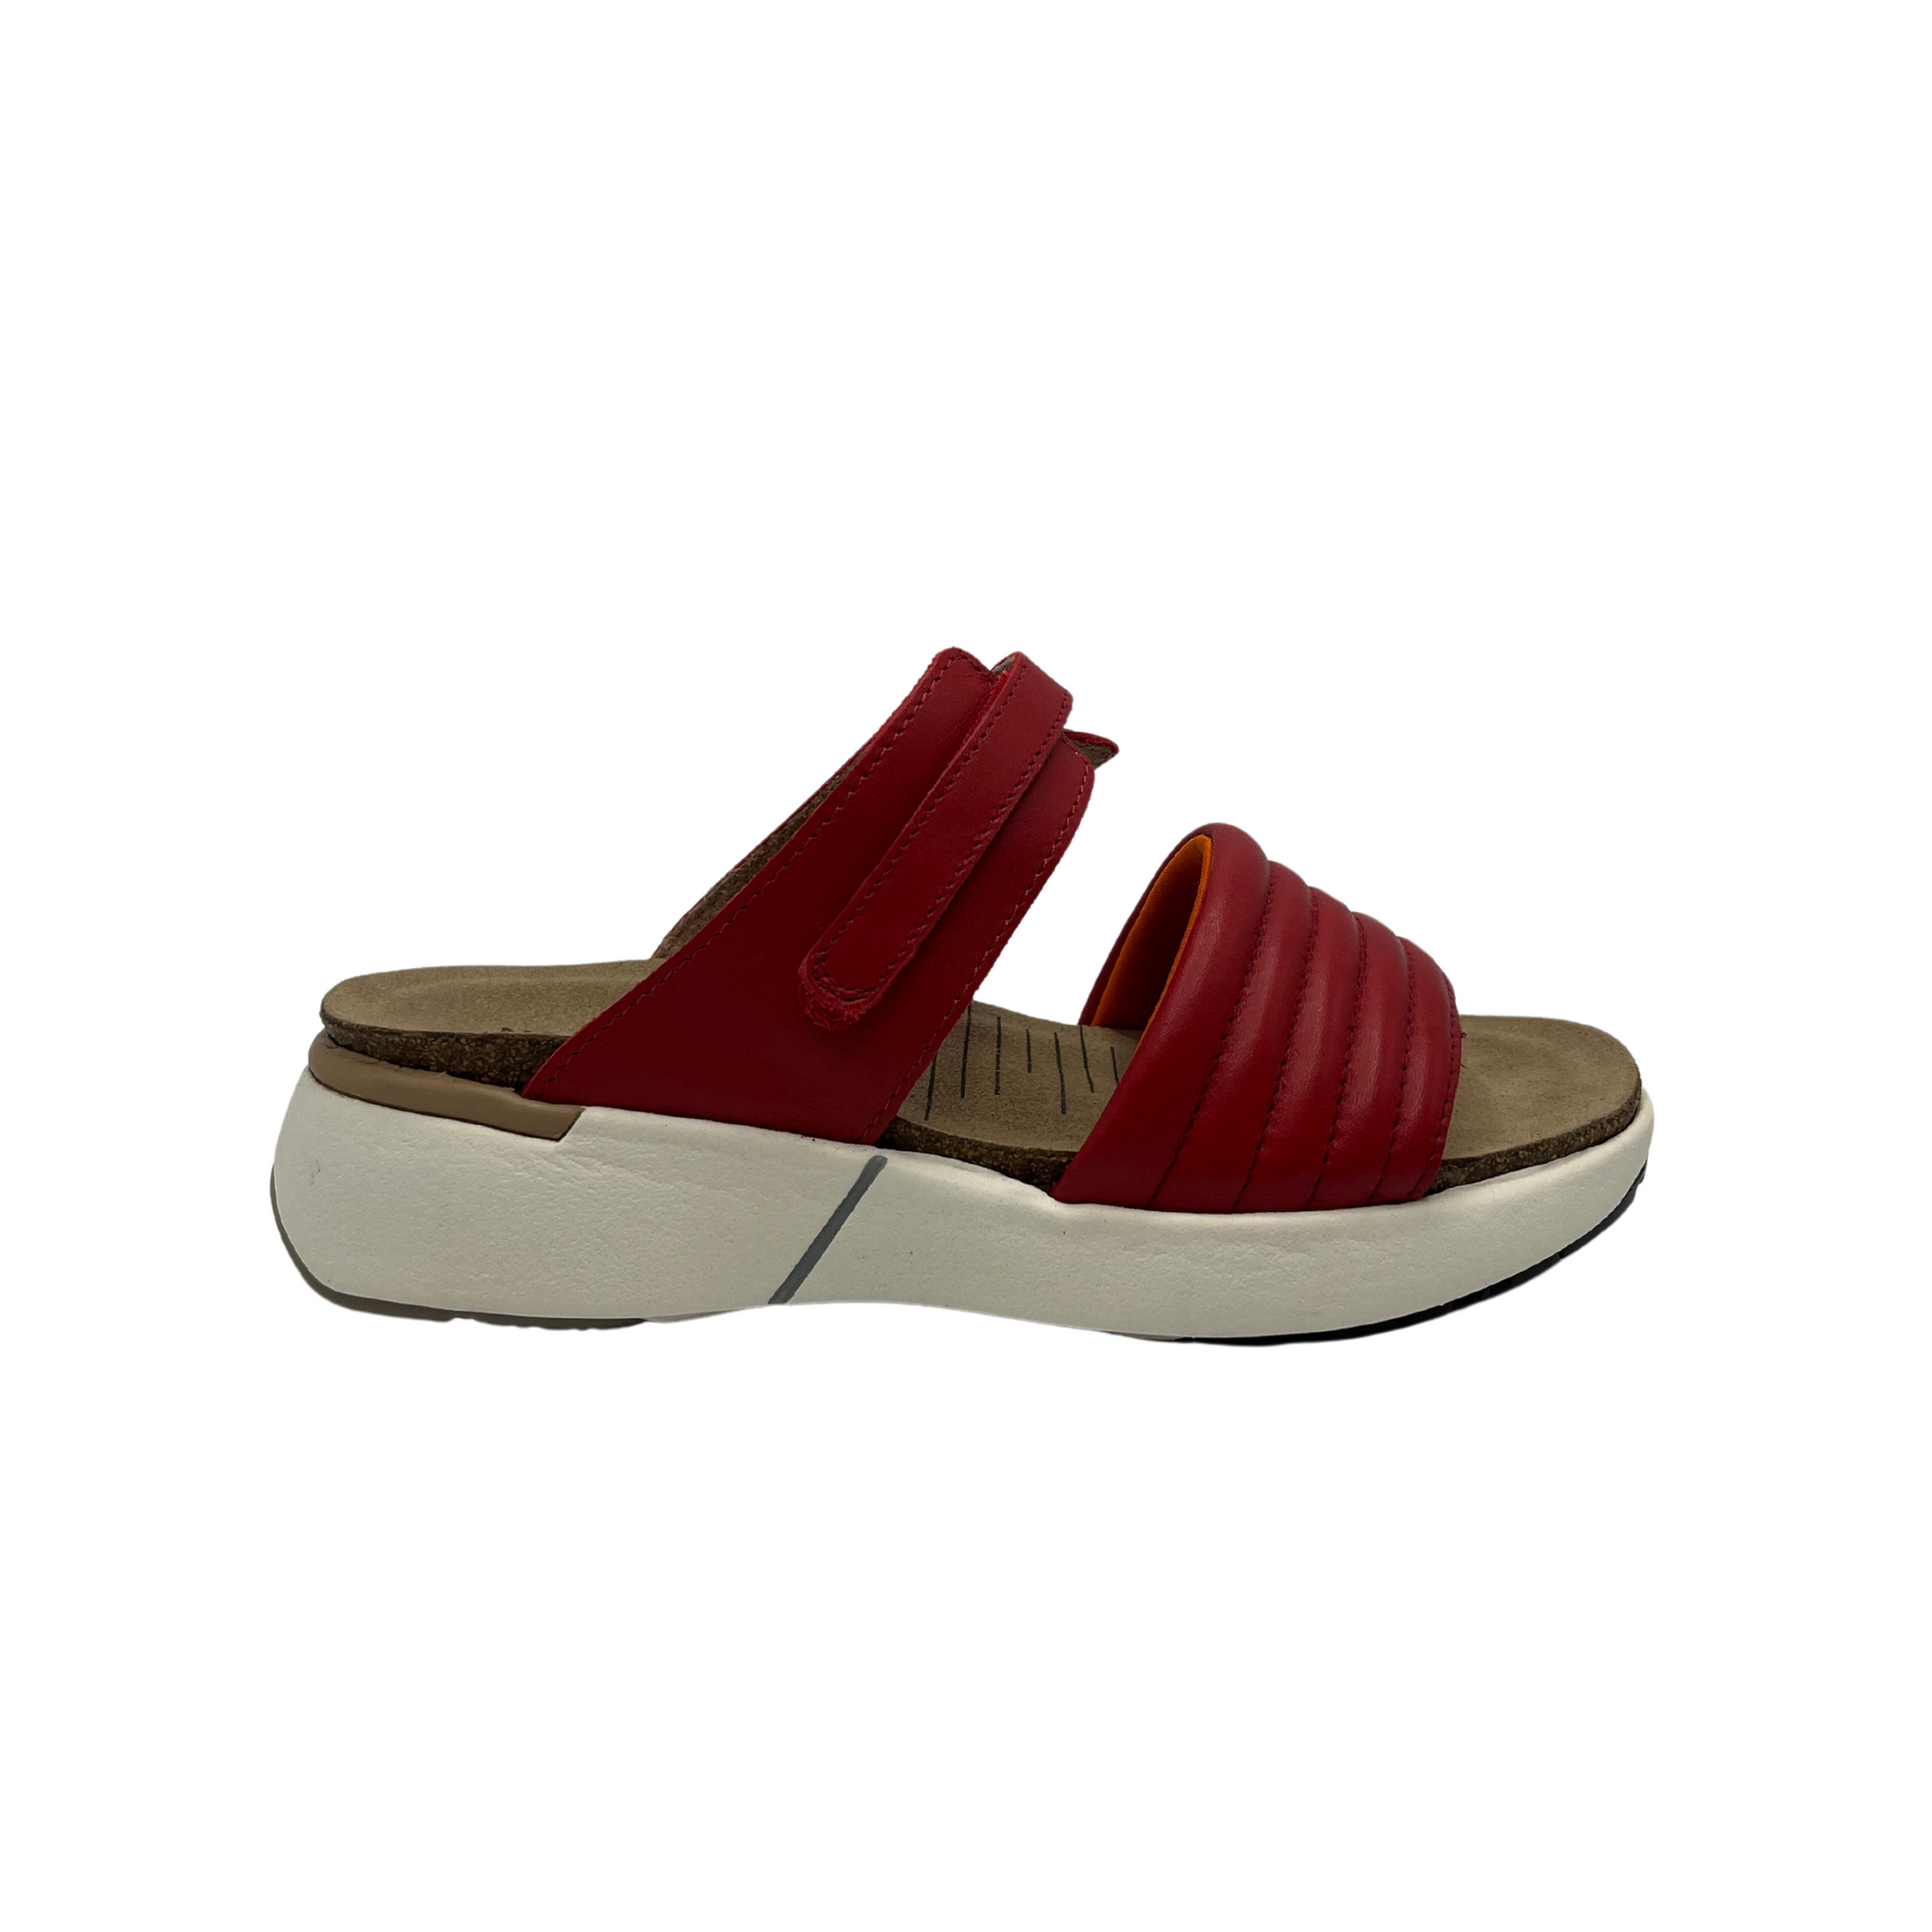 Right facing view of red leather slip on sandal with white rubber outsole, padded front strap and open toe